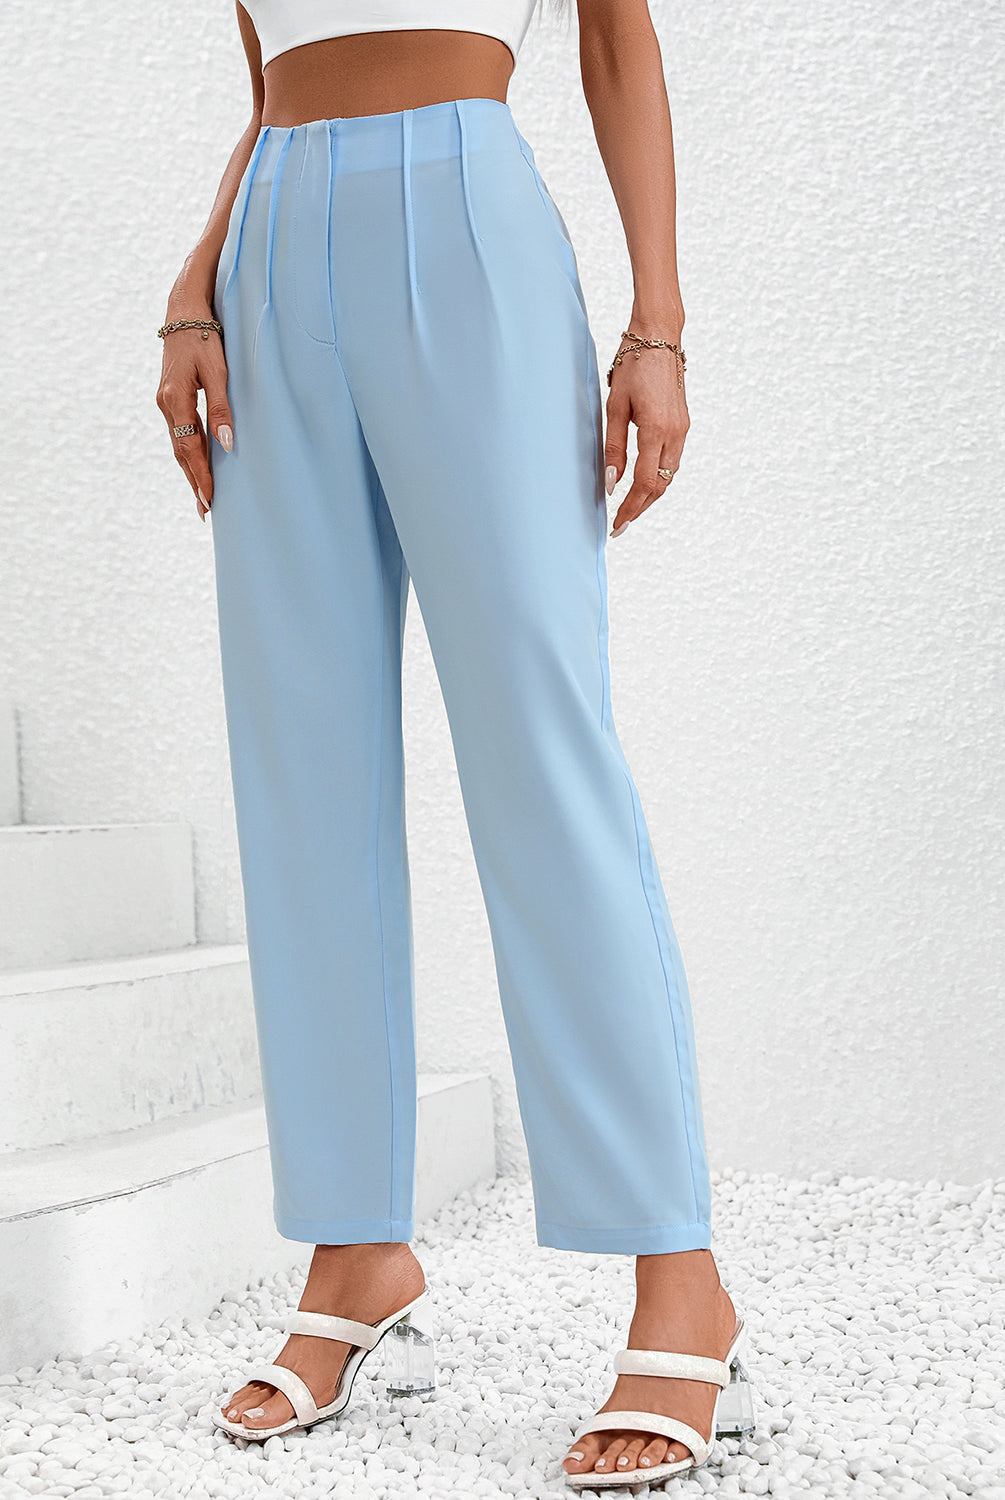 Lavender Ruched Long Pants Clothing